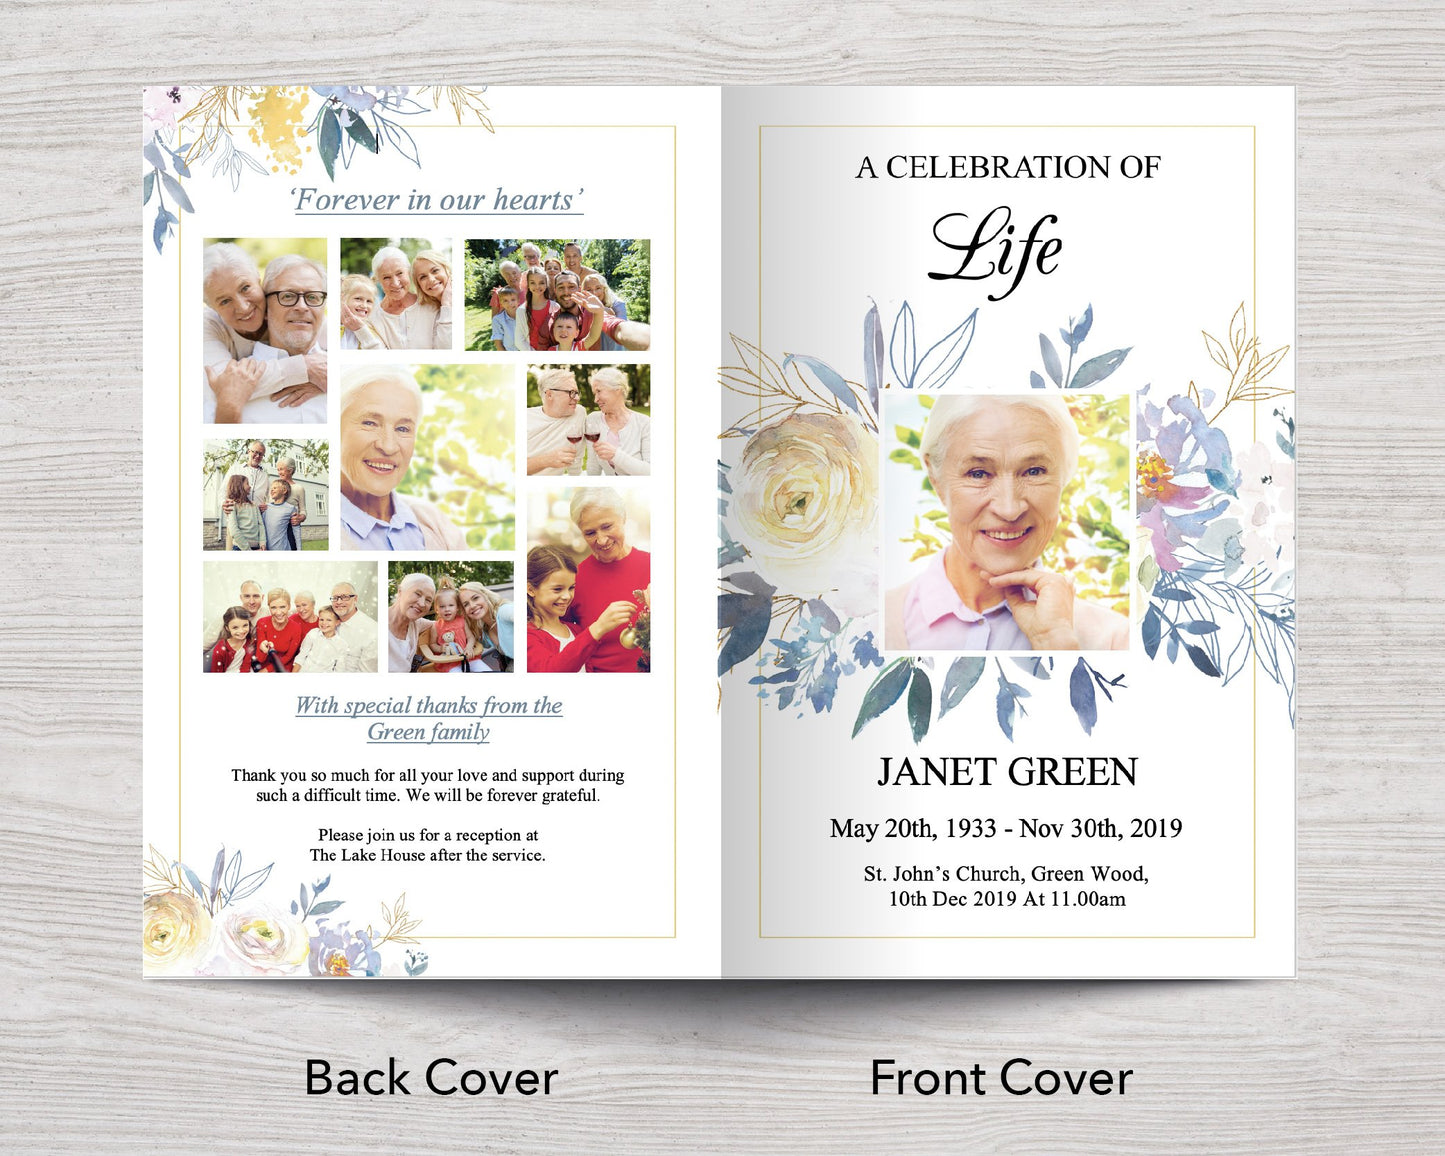 4 Page Spring Bloom Funeral Program Template